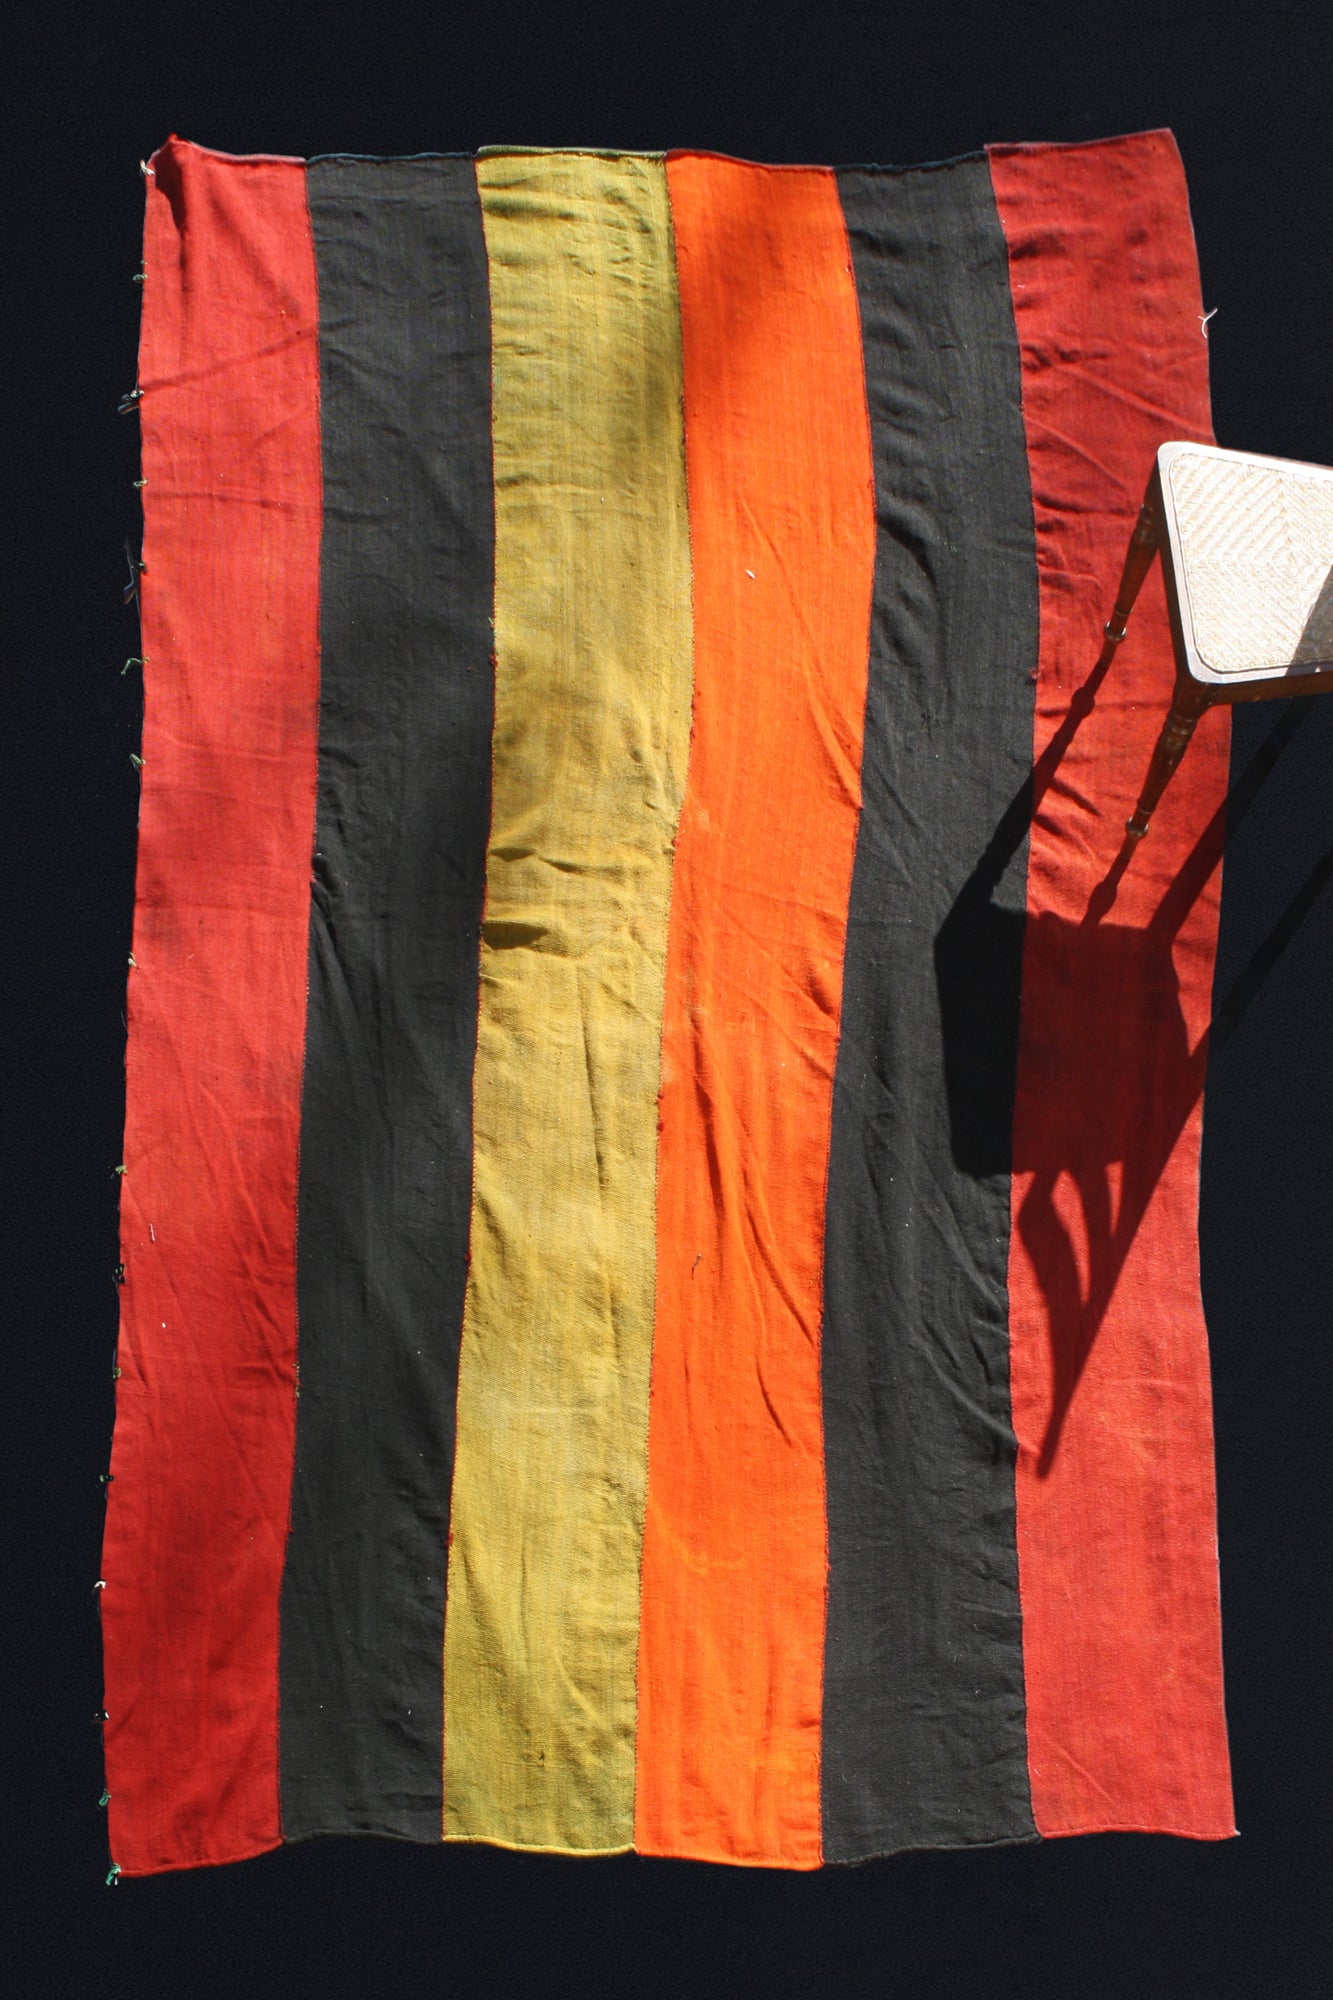 6 Band Red, Black, Orange And Yellow Perde From Central Turkey (7' x 11' 8")